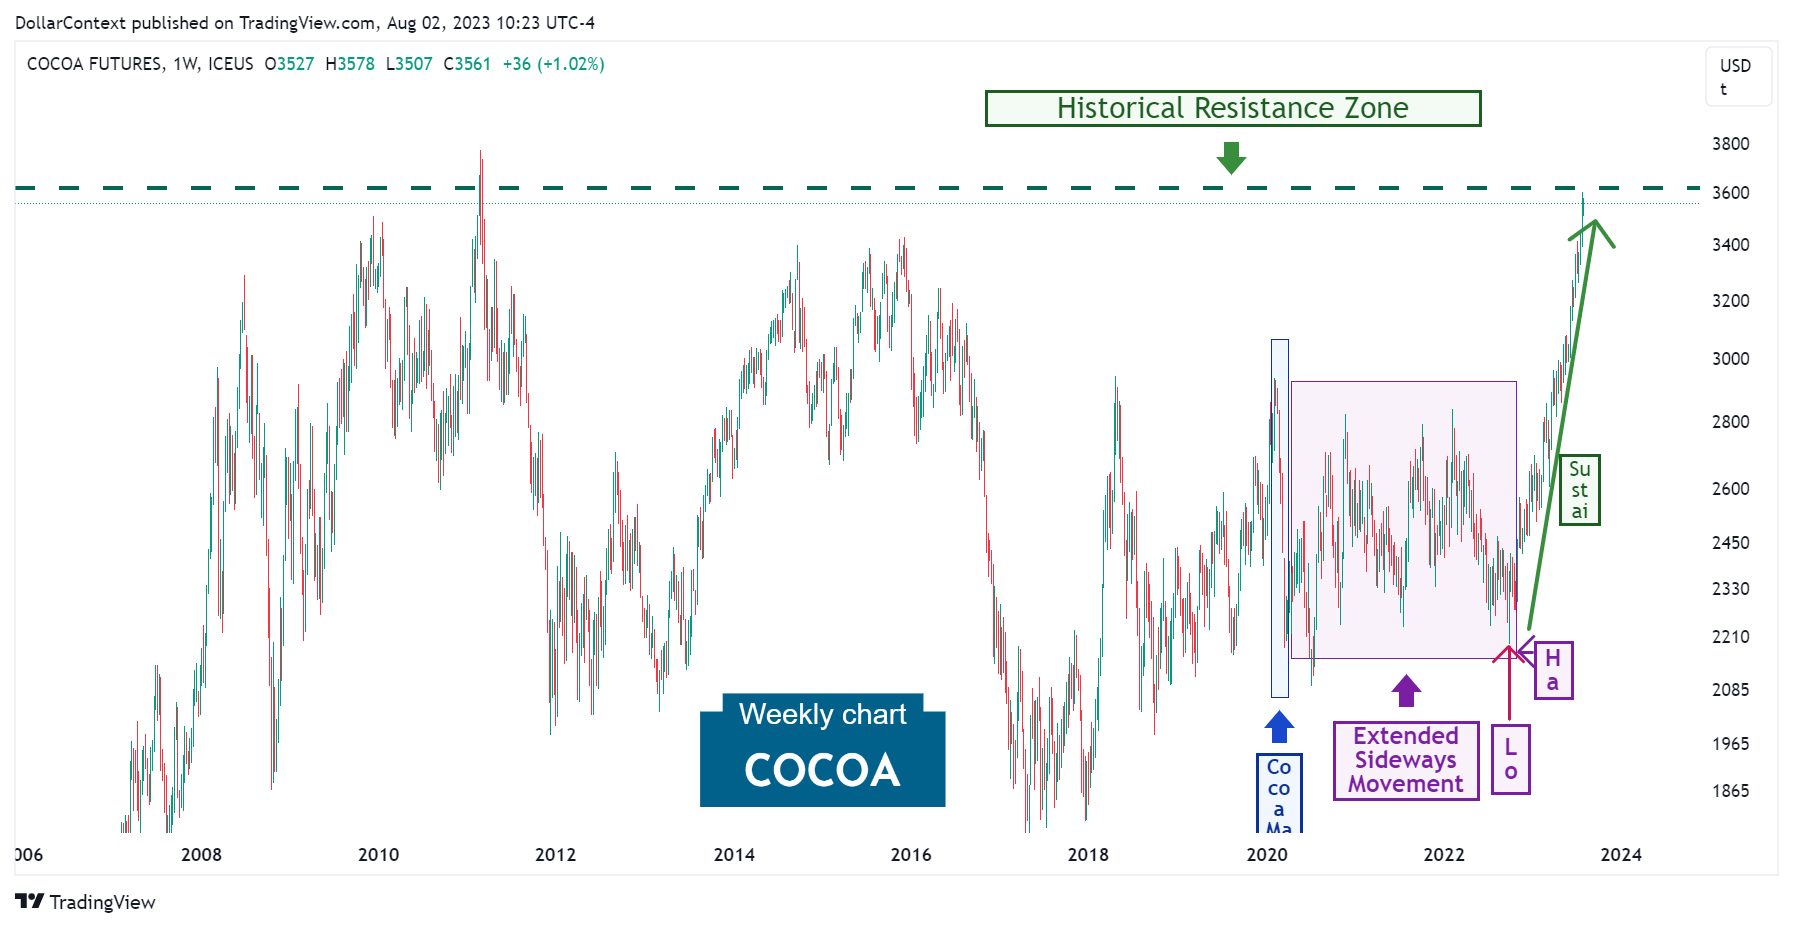 Cocoa in a Historical Resistance Zone